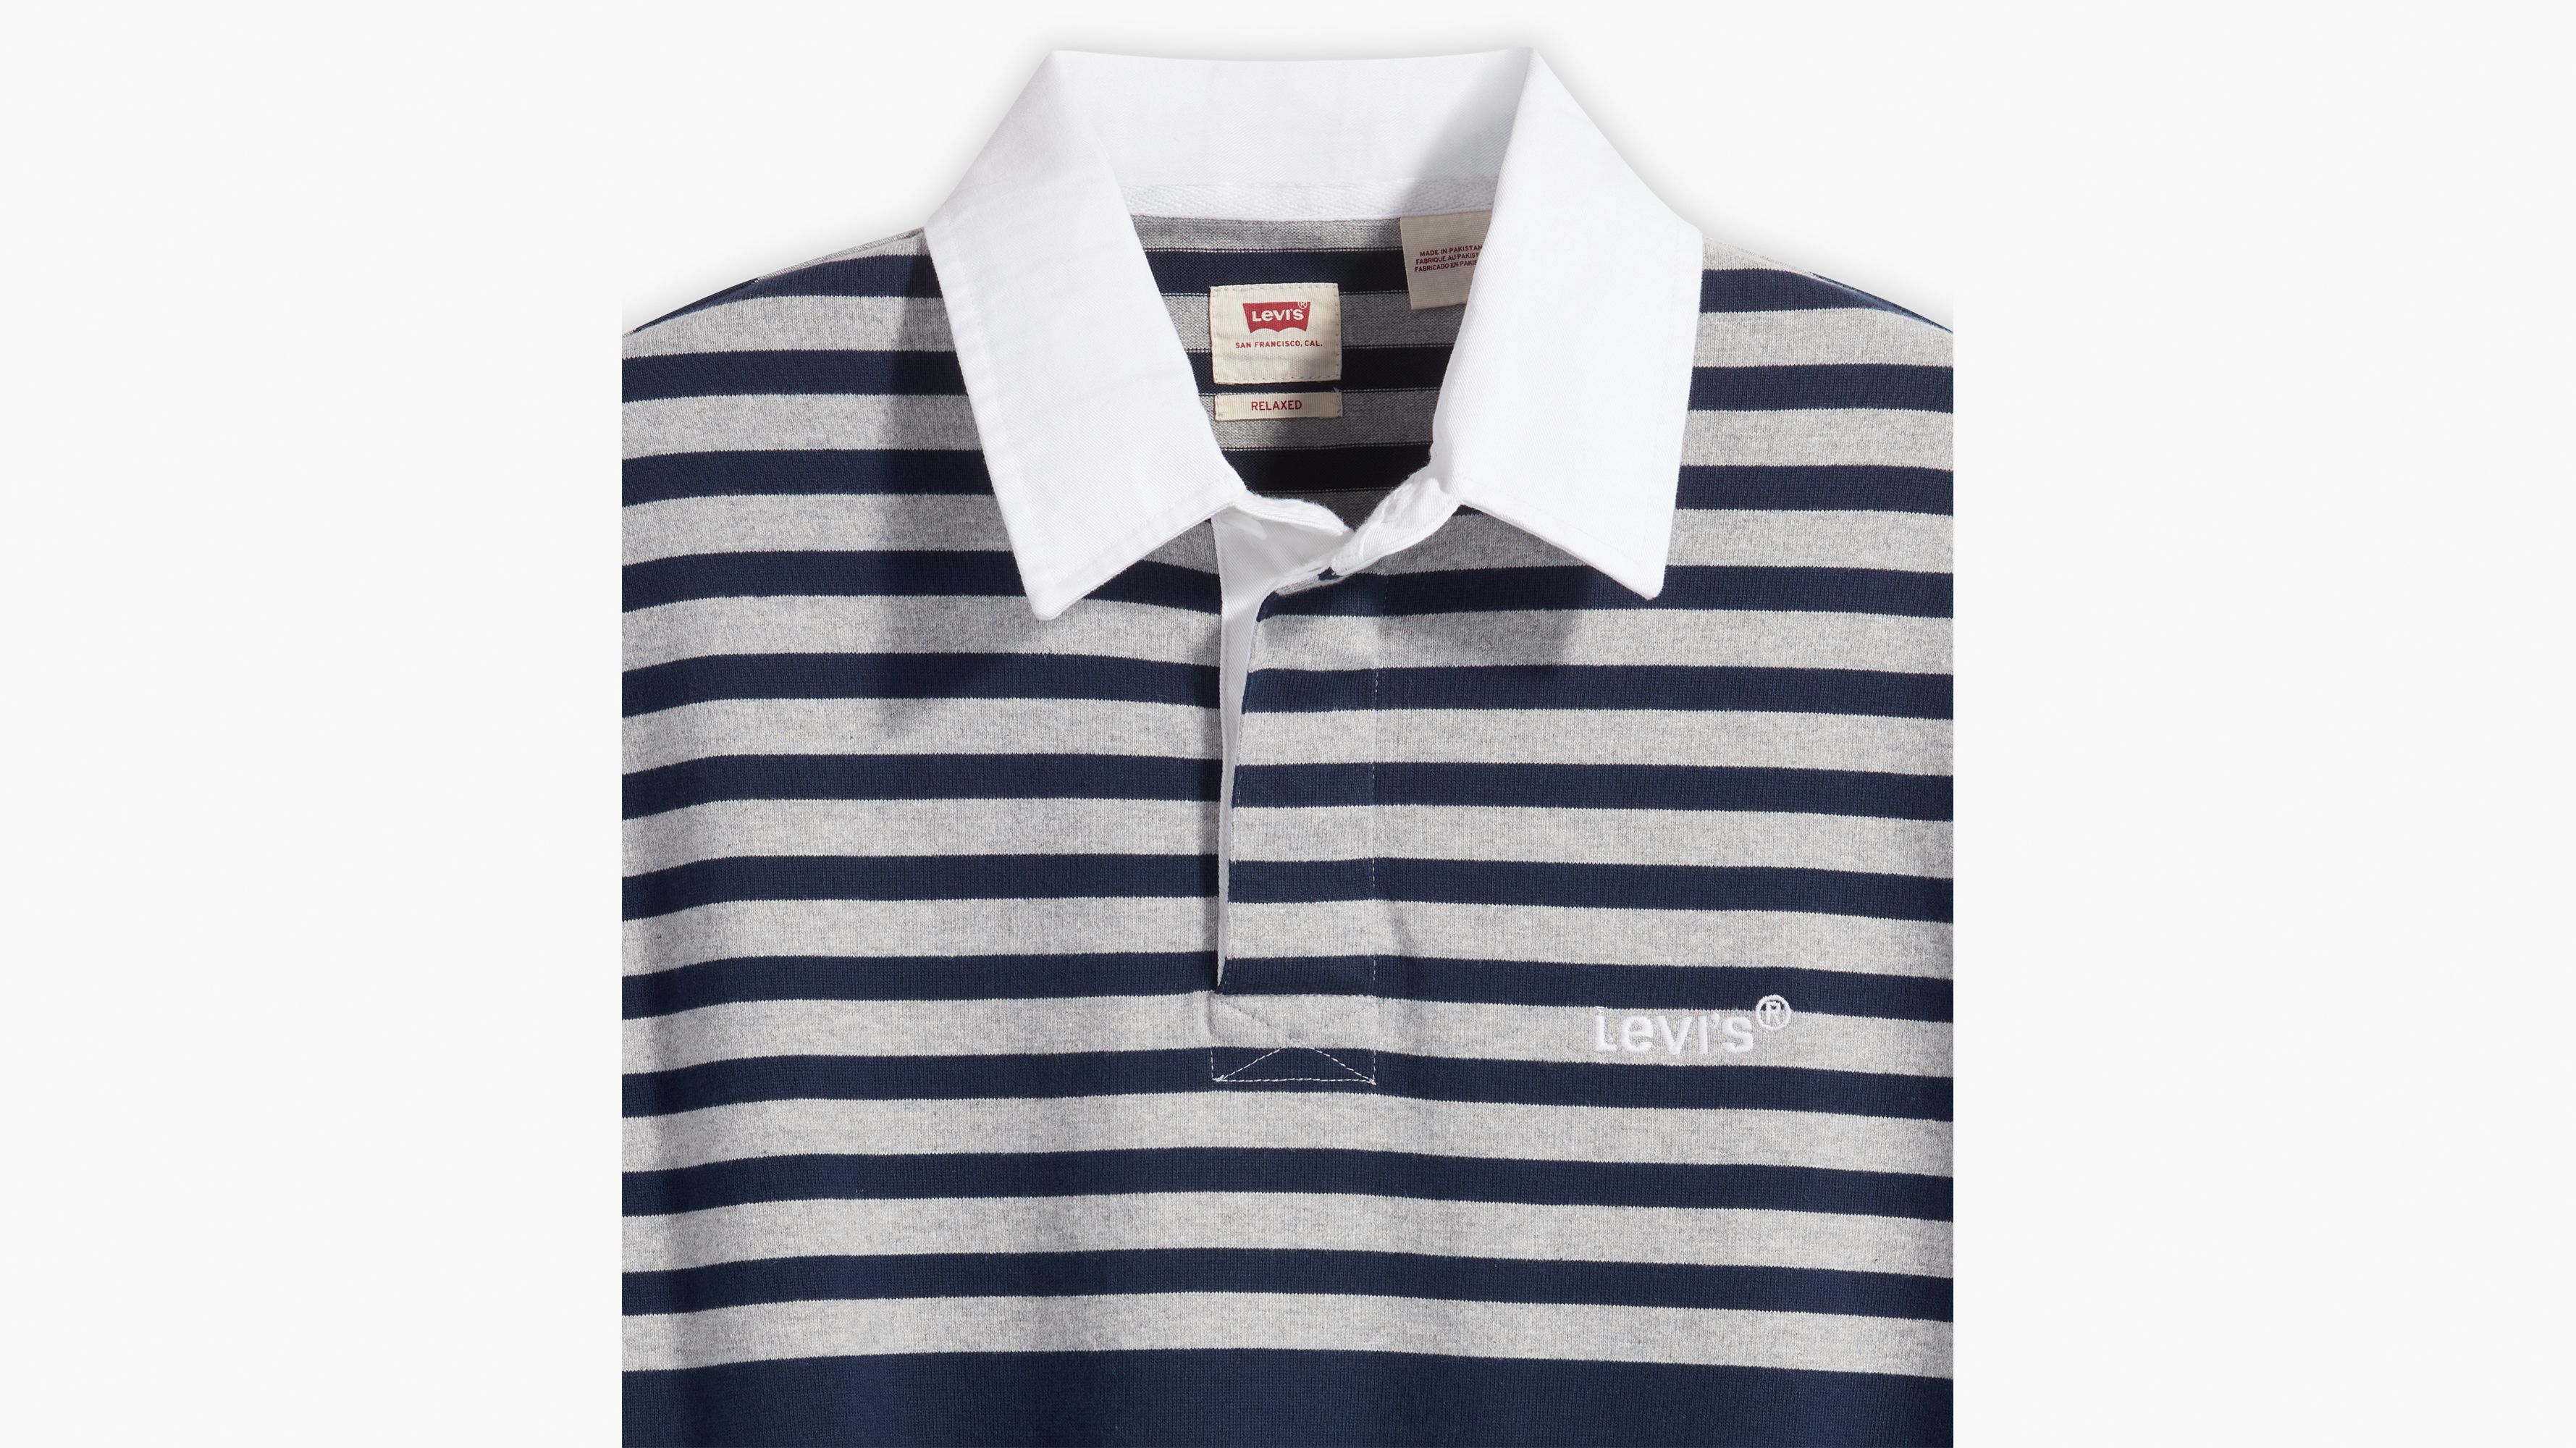 Union Rugby Polo Shirt - Multi-color